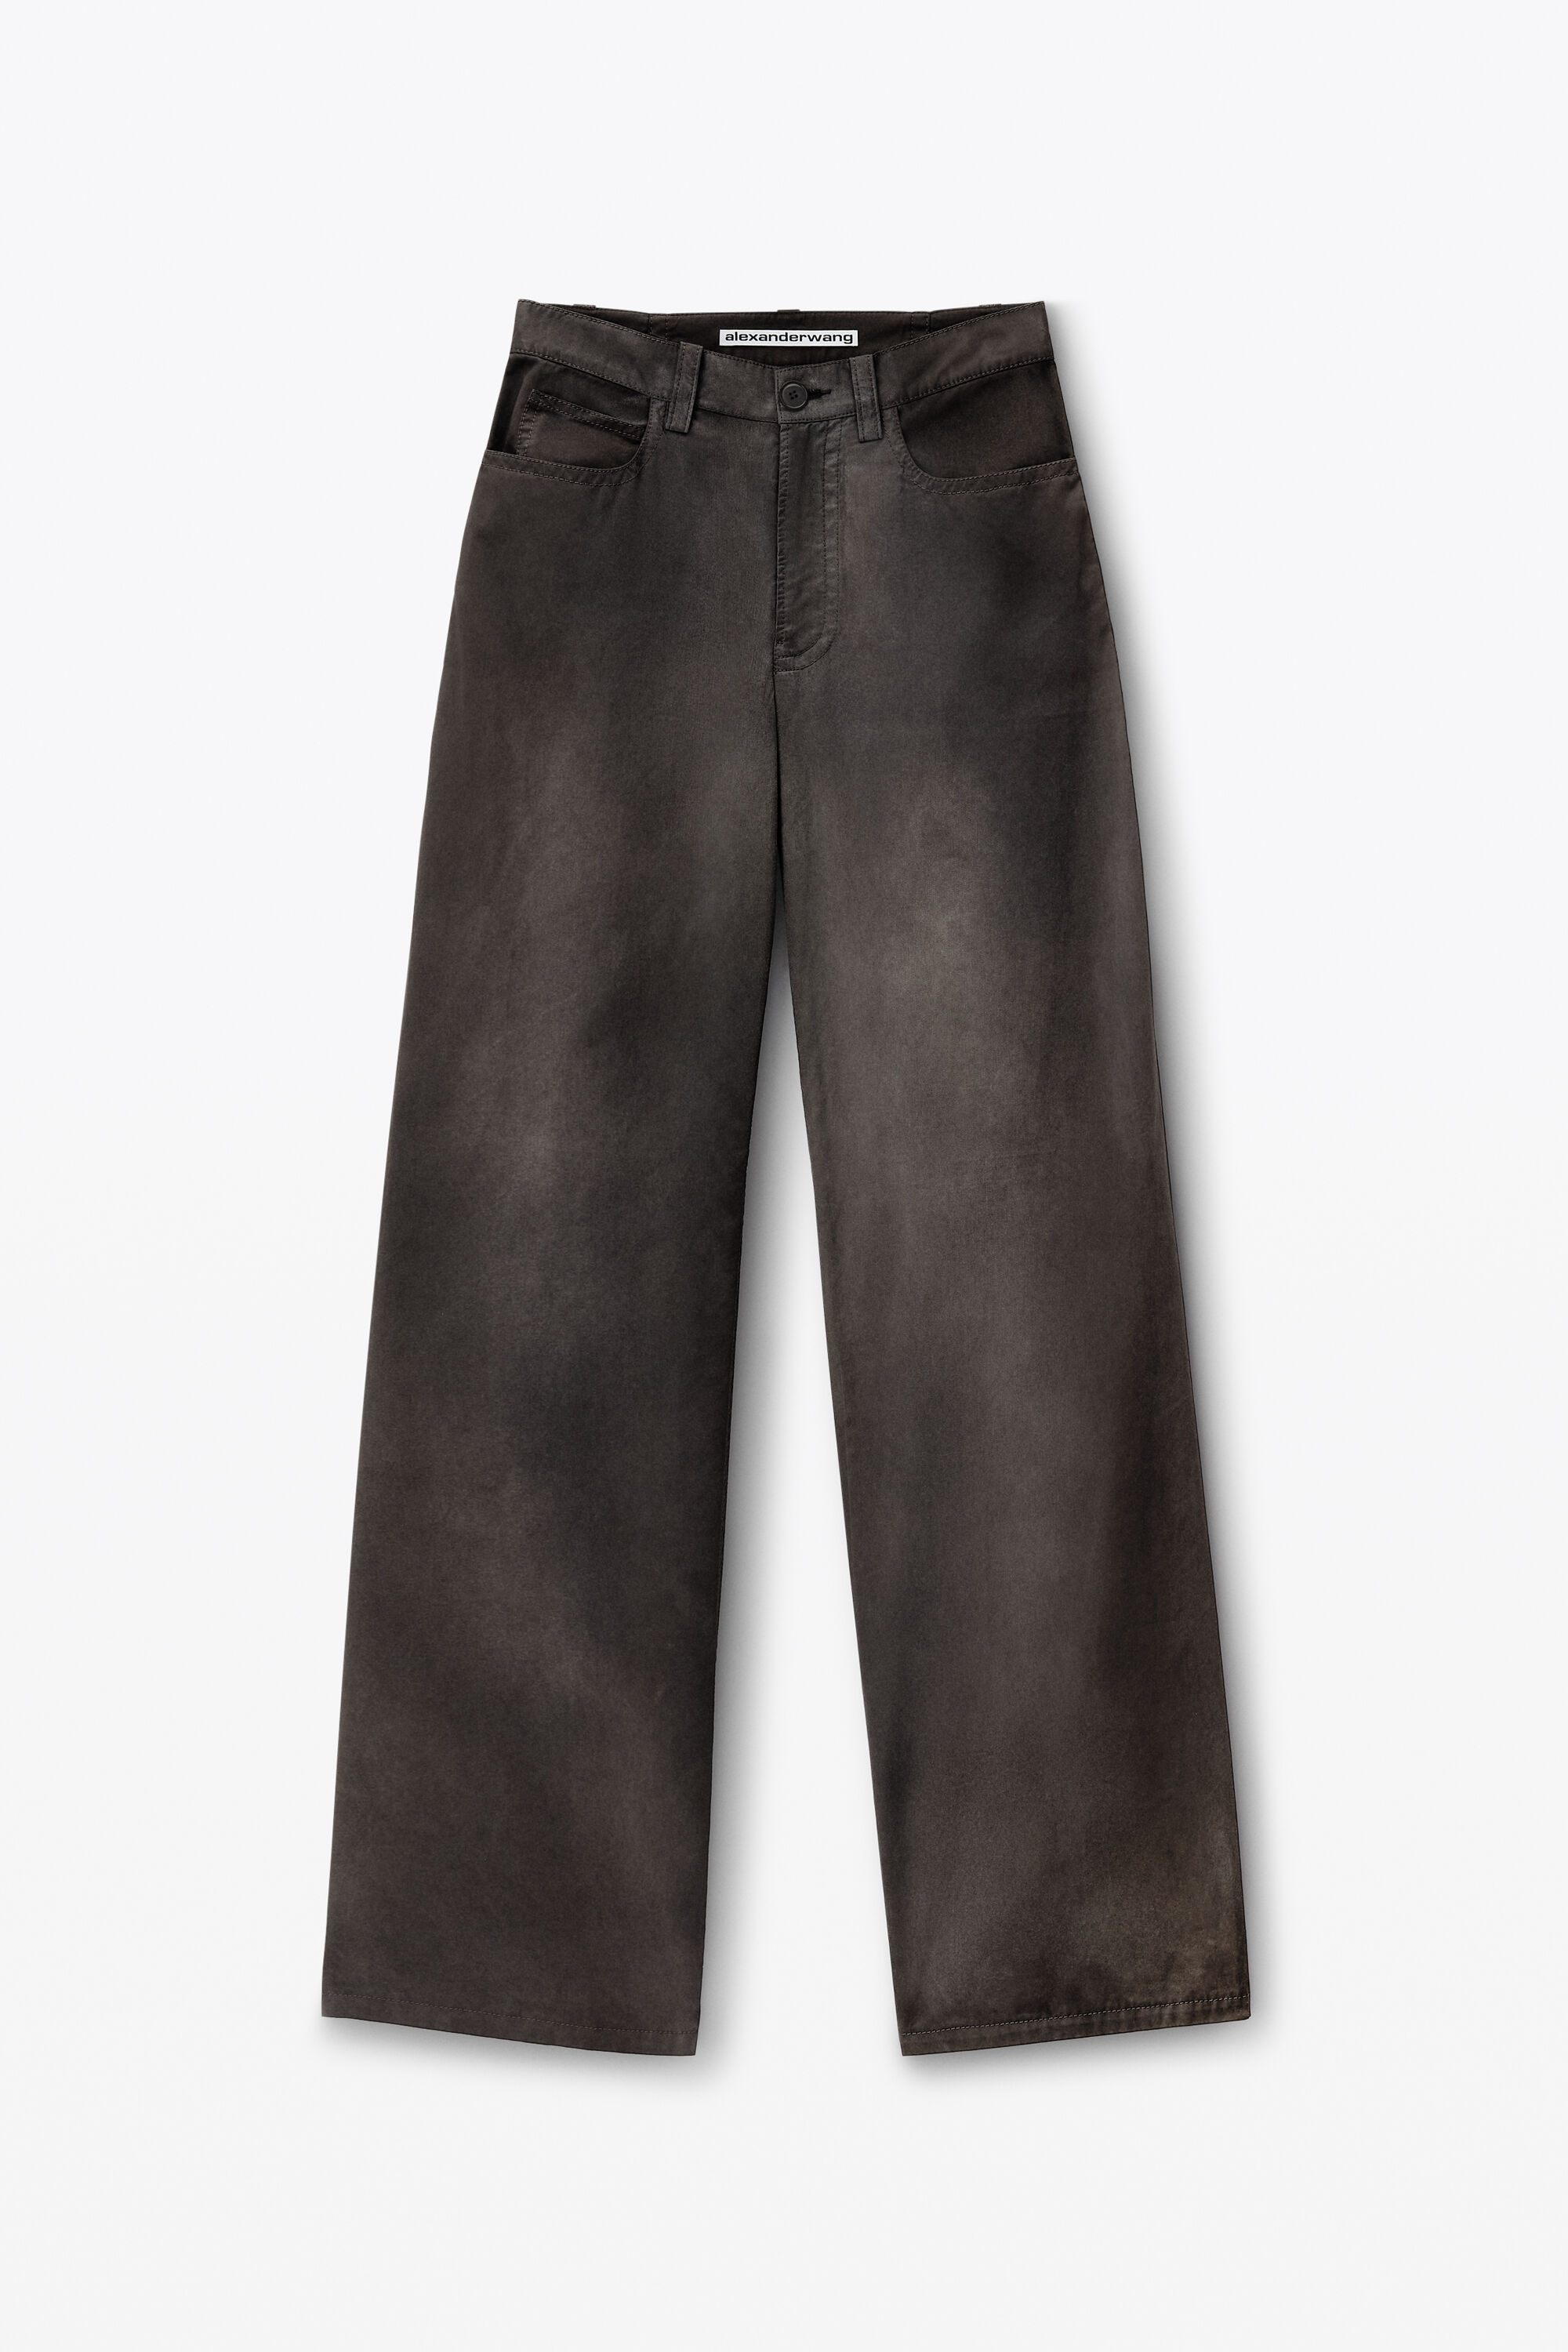 alexanderwang Low-Rise Five-Pocket Pant in Cotton WASHED 